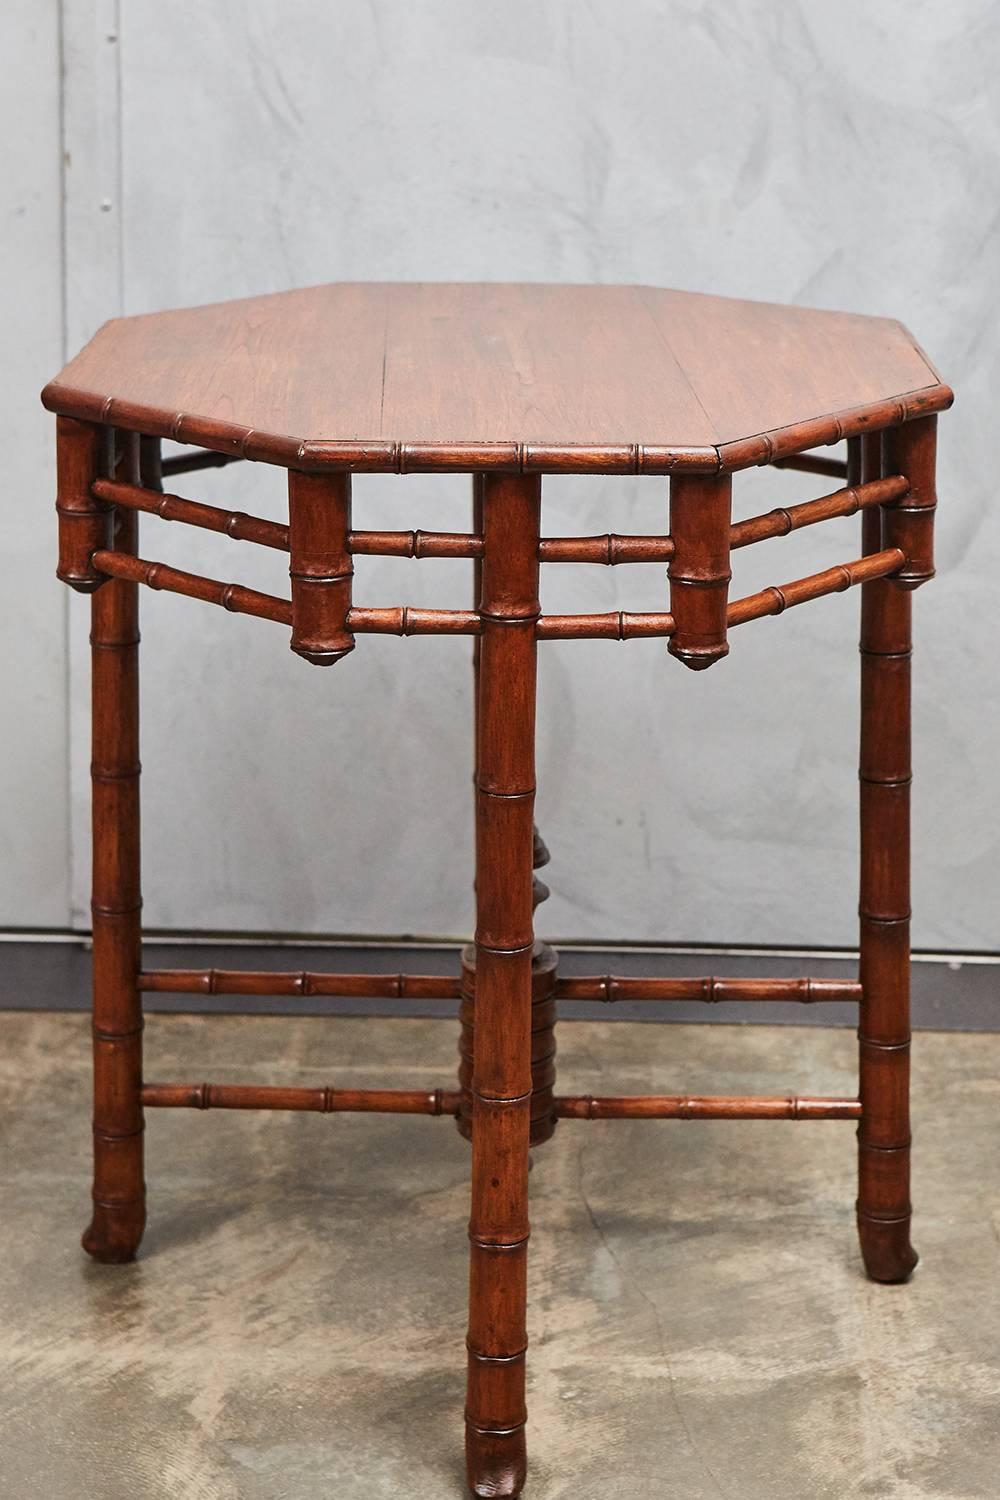 An unusual and interesting faux bamboo table, perhaps from one of the French settled dominions. The table stands on four legs, with two open work X-stretchers and an octagonal top with lattice like decorative skirting. Note the elaborately turned